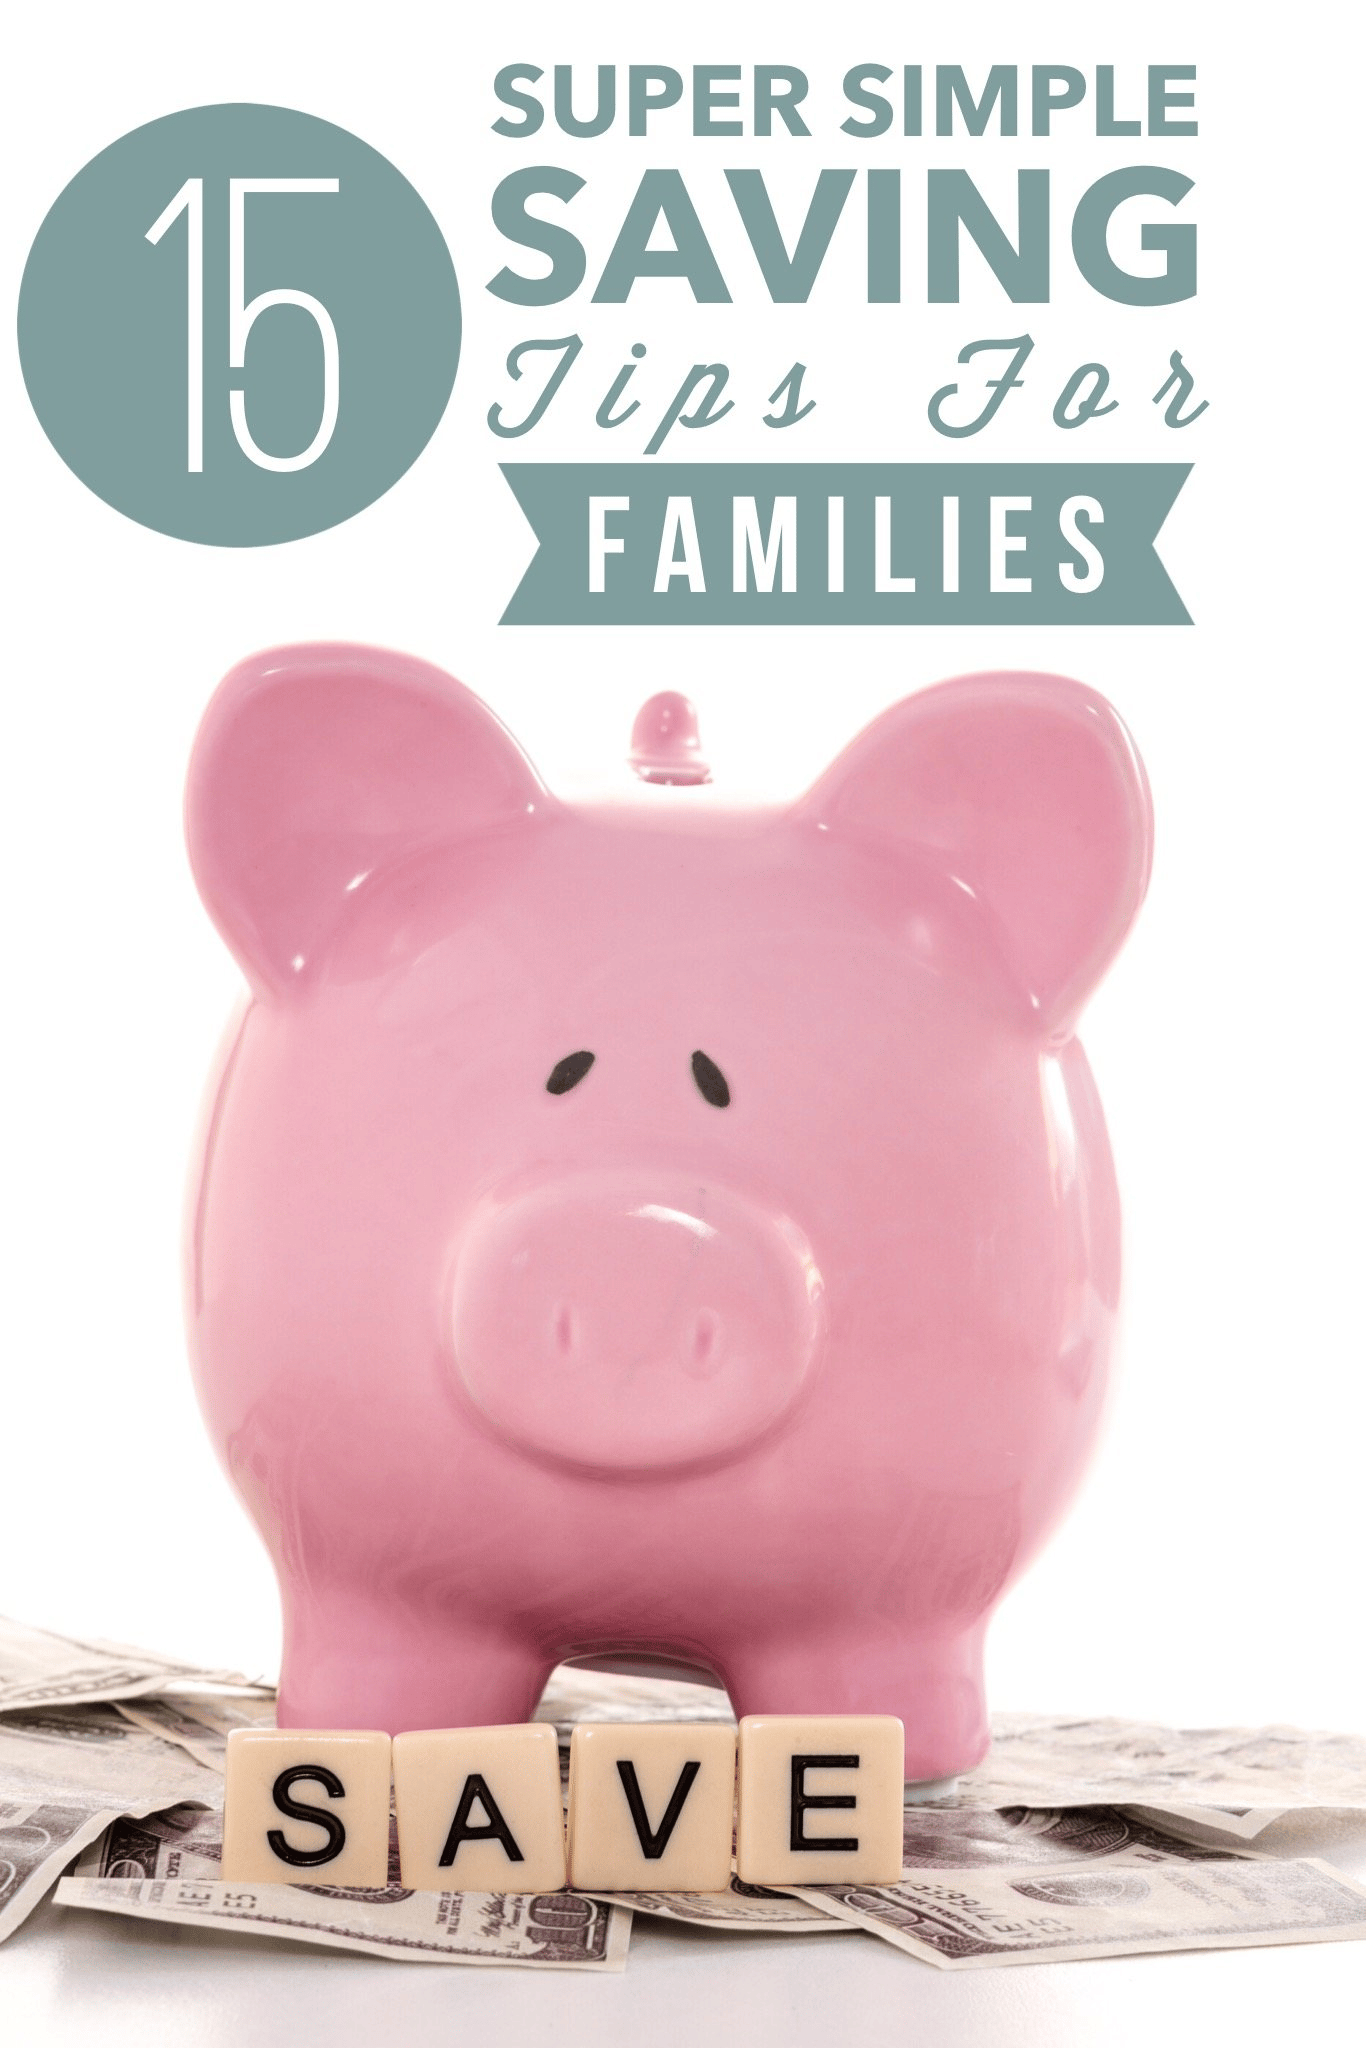 15-surprisingly-simple-money-saving-tips-for-families-good